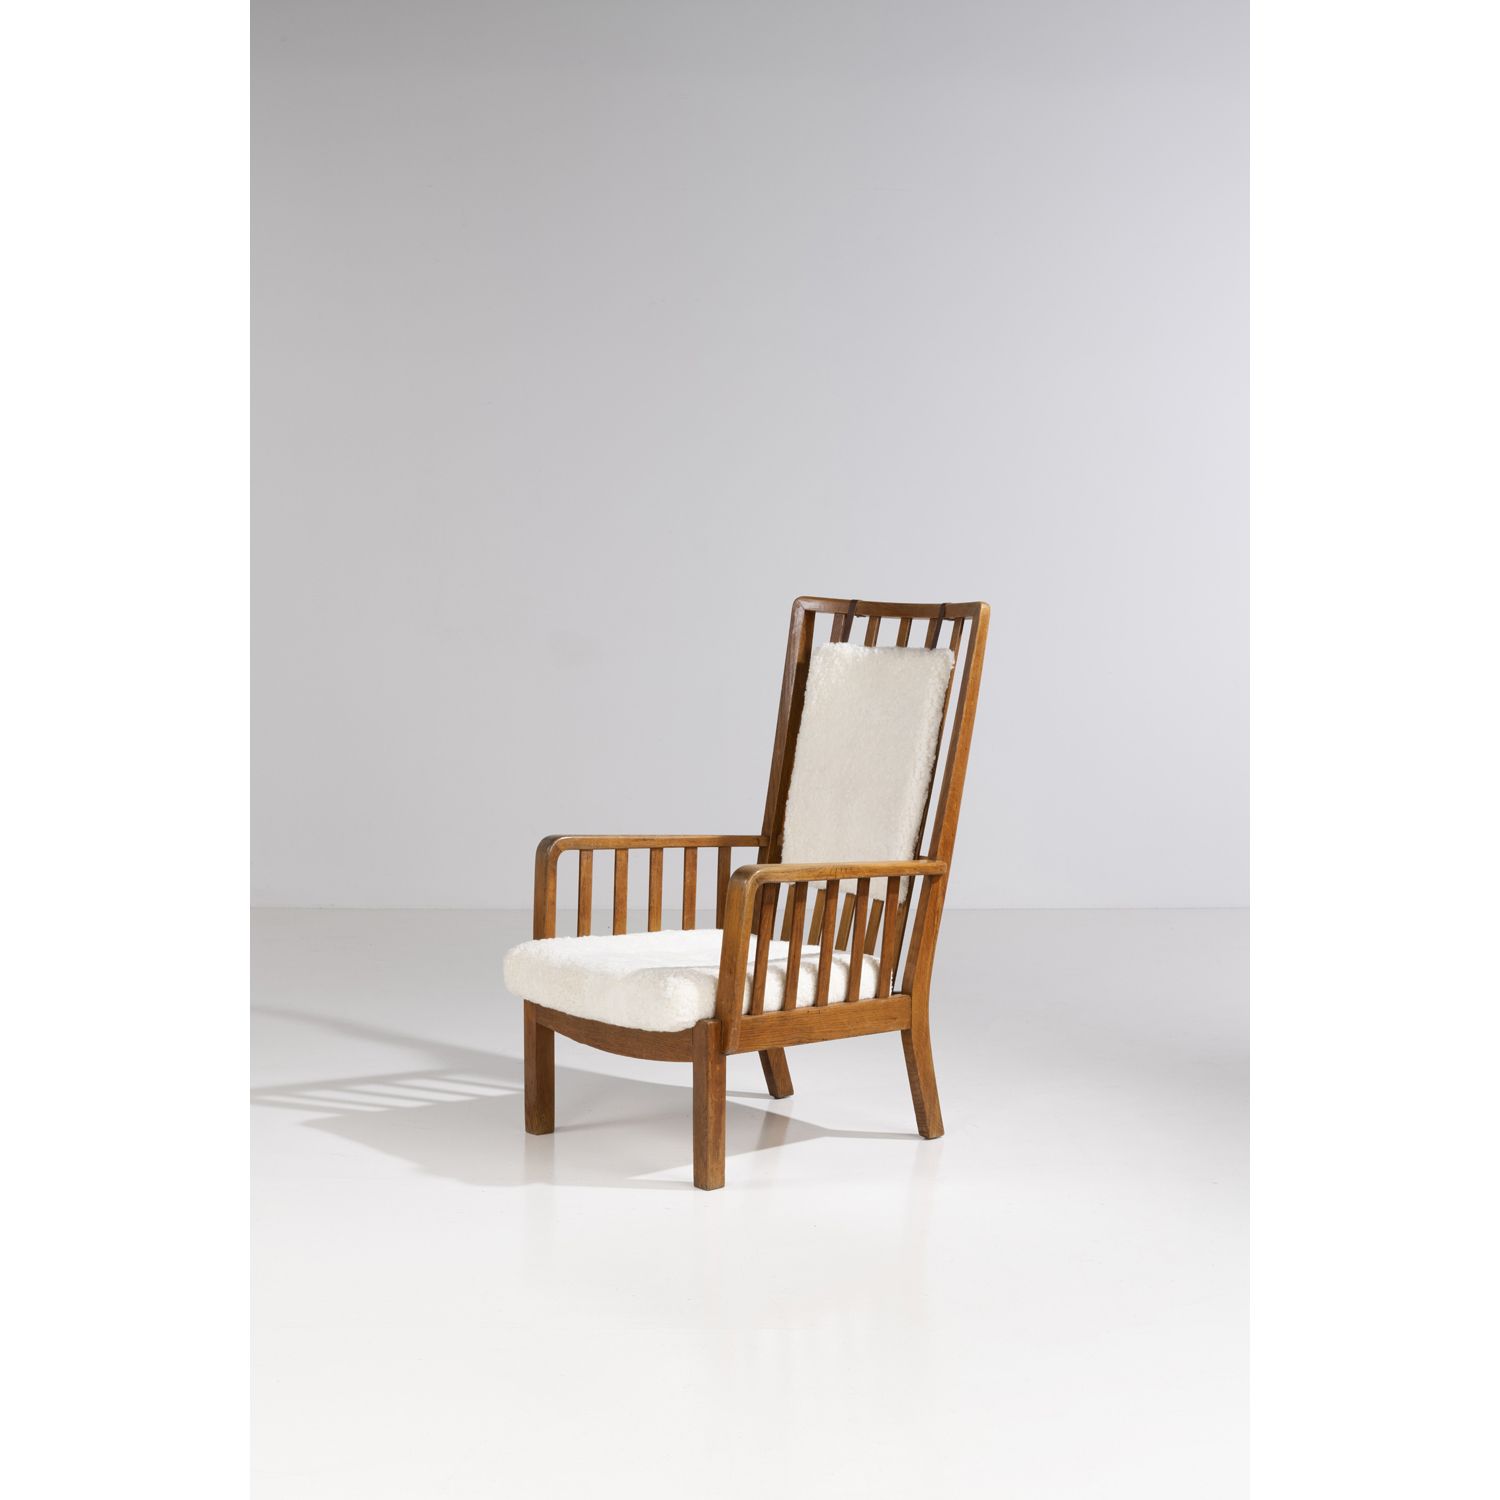 Null Vilhelm Lauritzen (1894-1984), attributed to

Armchair

Wood and fabric

Mo&hellip;